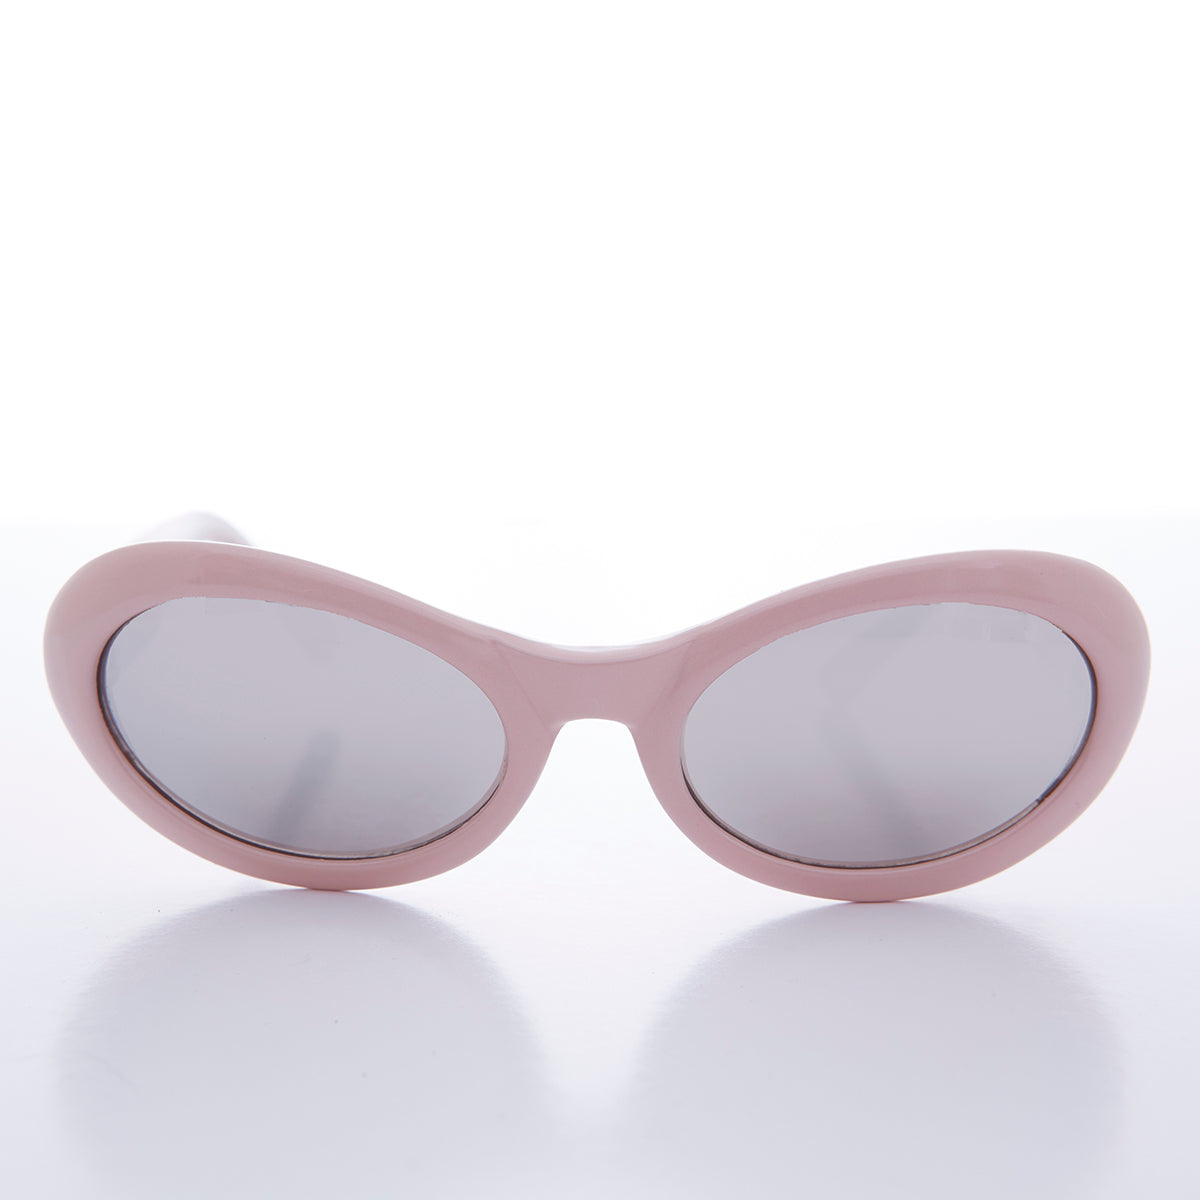 90s Curved Oval Cat Eye Vintage Sunglass in Pastel Colors